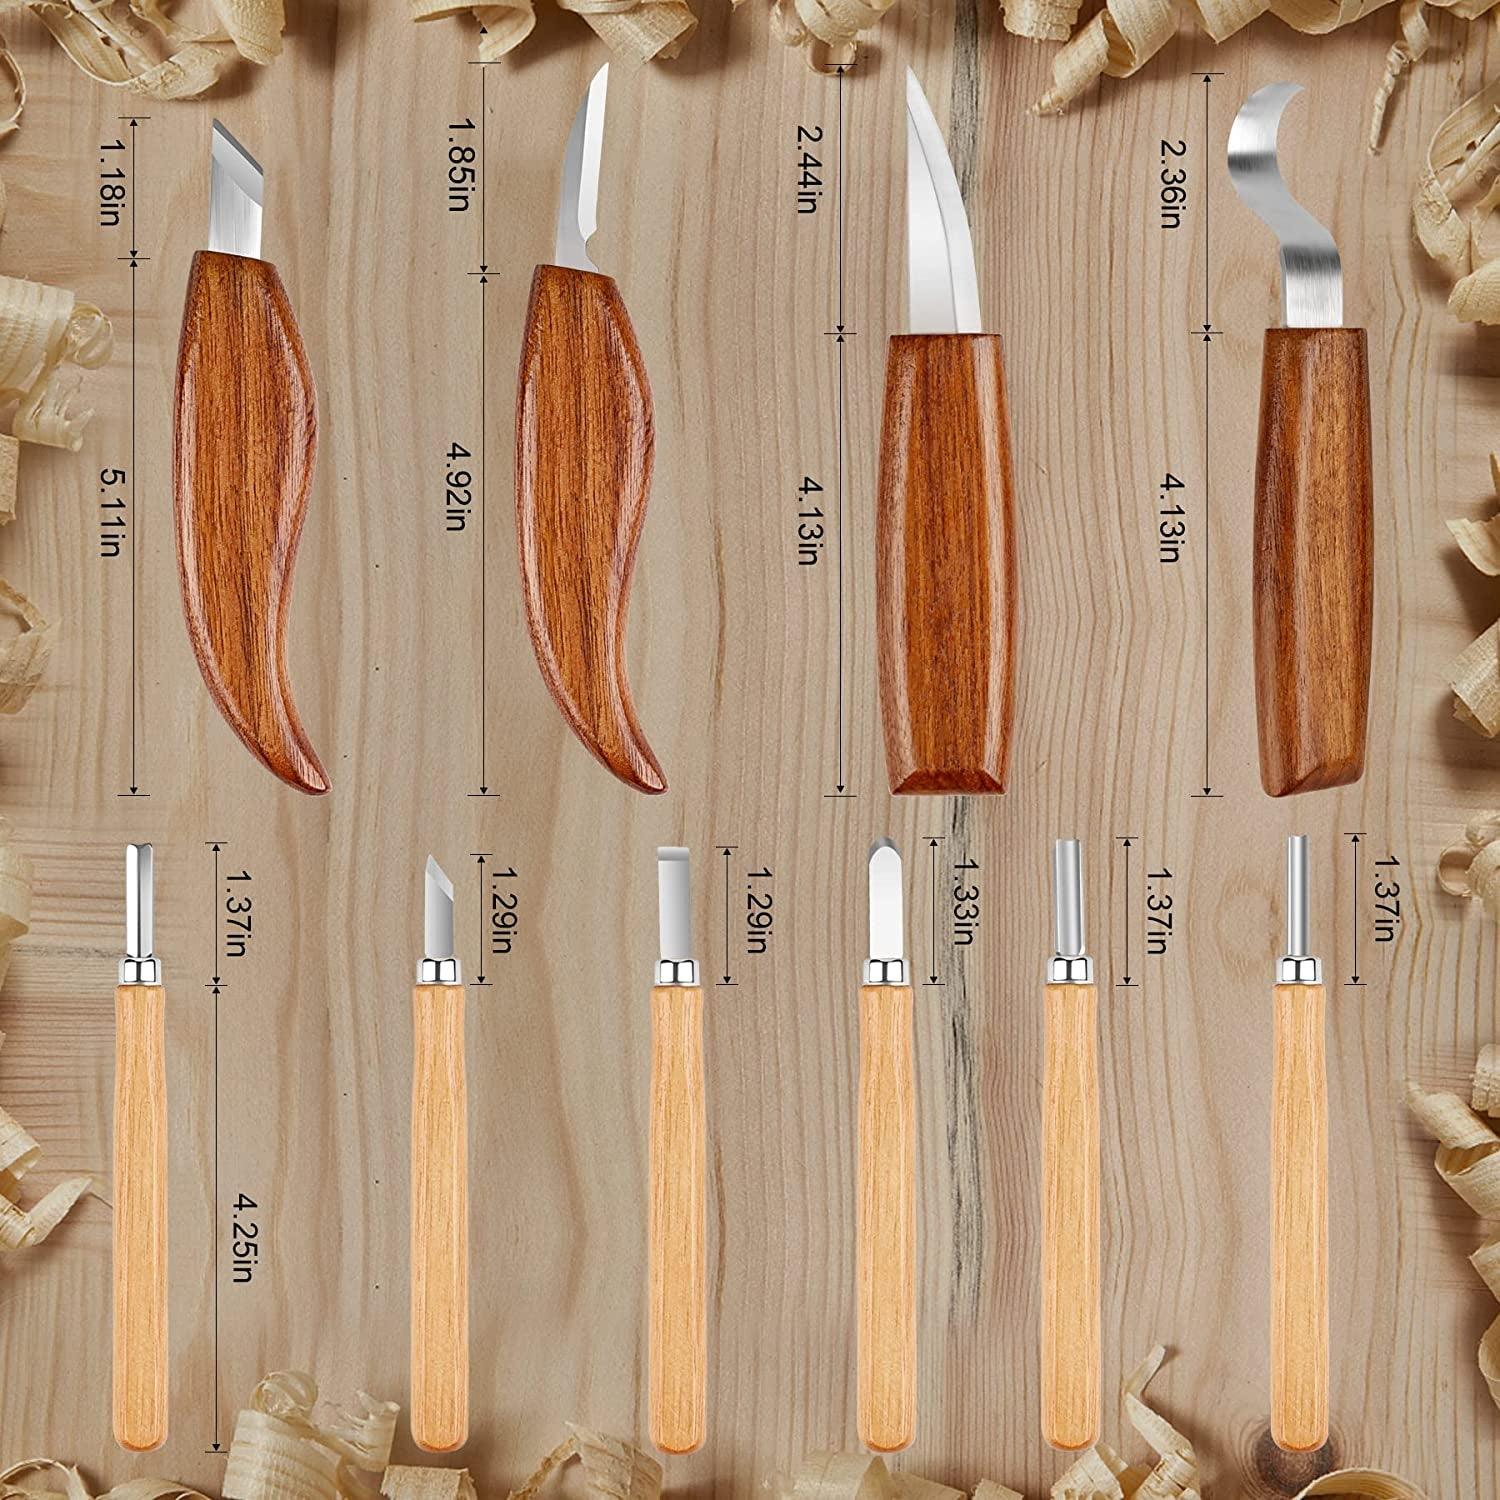 30 Pcs Wood Carving Tools Wood Whittling Kit Include Hand Carving